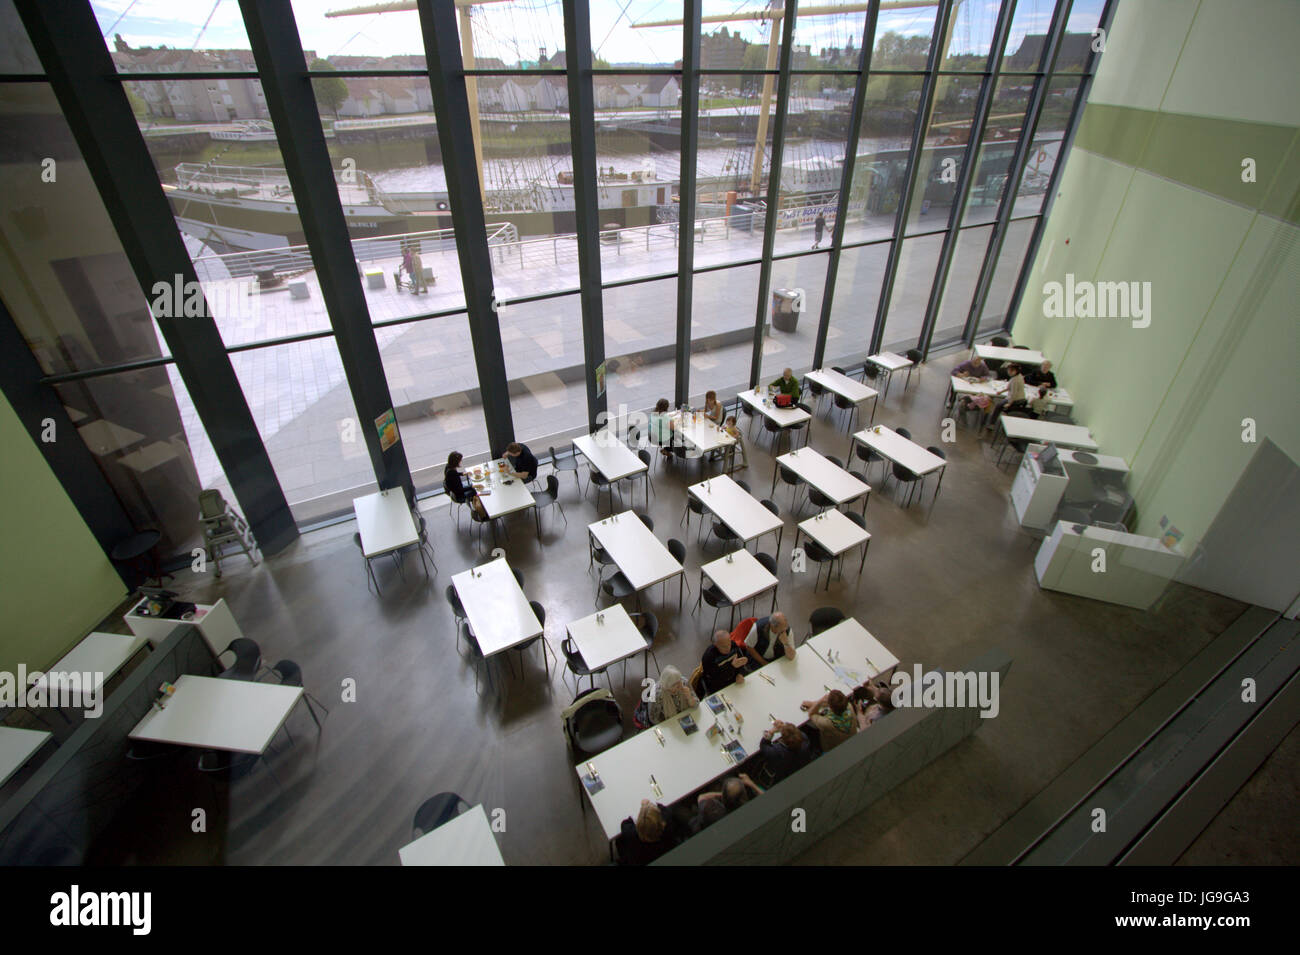 Riverside Museum Glasgow interior cafe shot from above Stock Photo